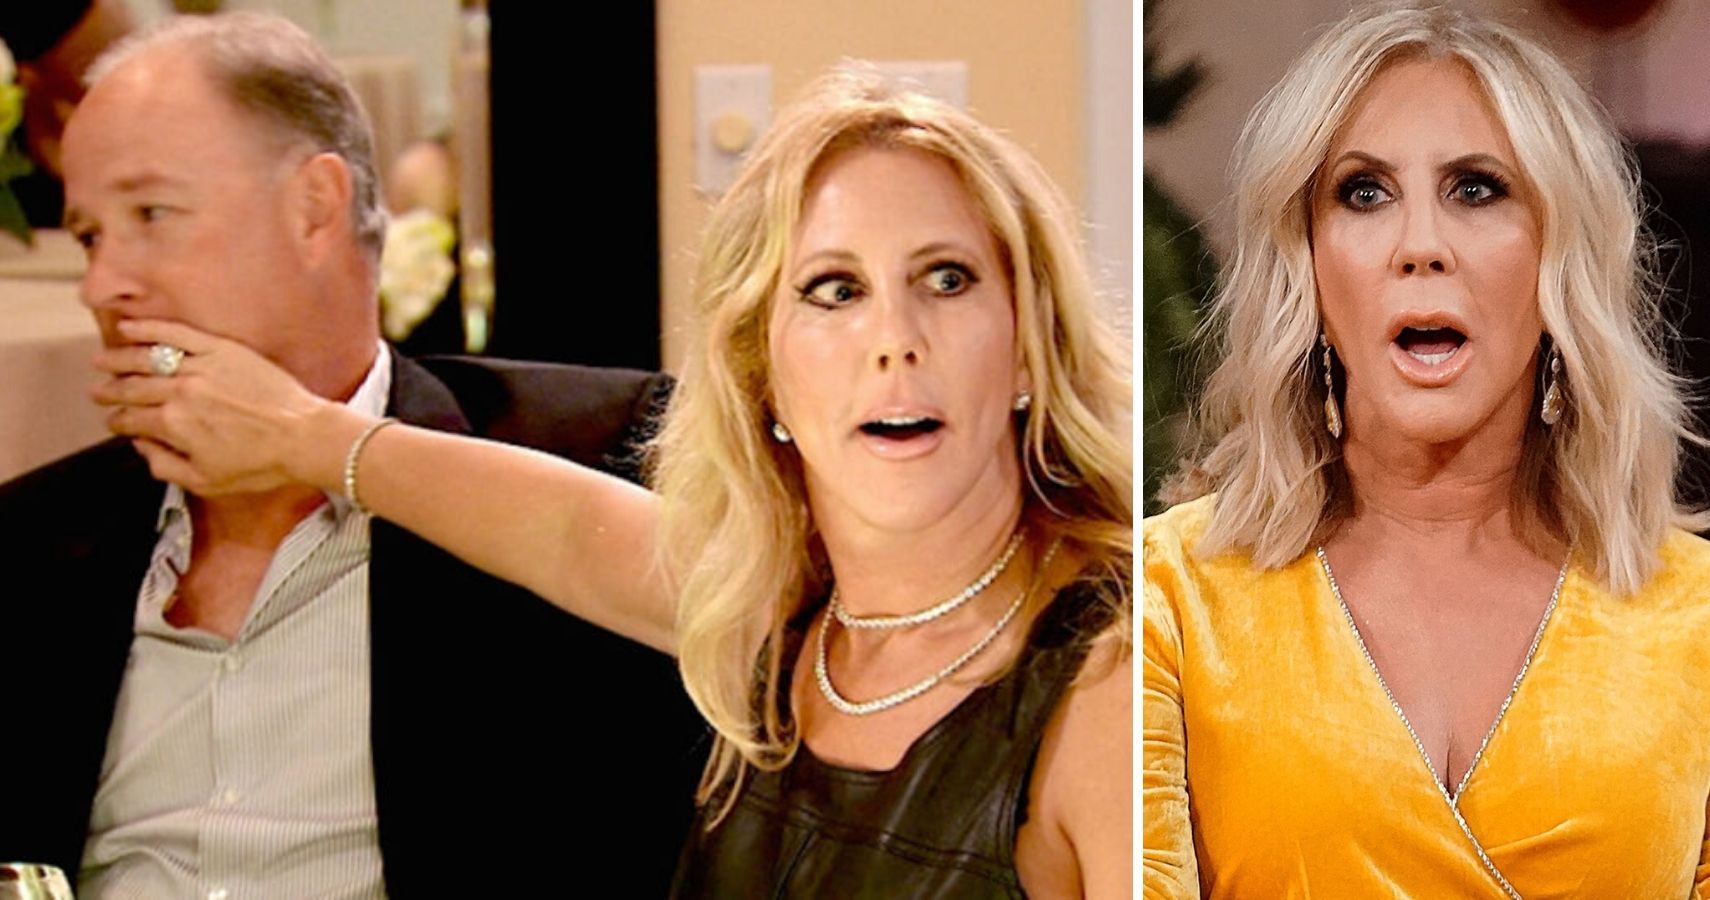 The Real Housewives Of Orange County Vicki Gunvalsons 10 Biggest Fights Ranked